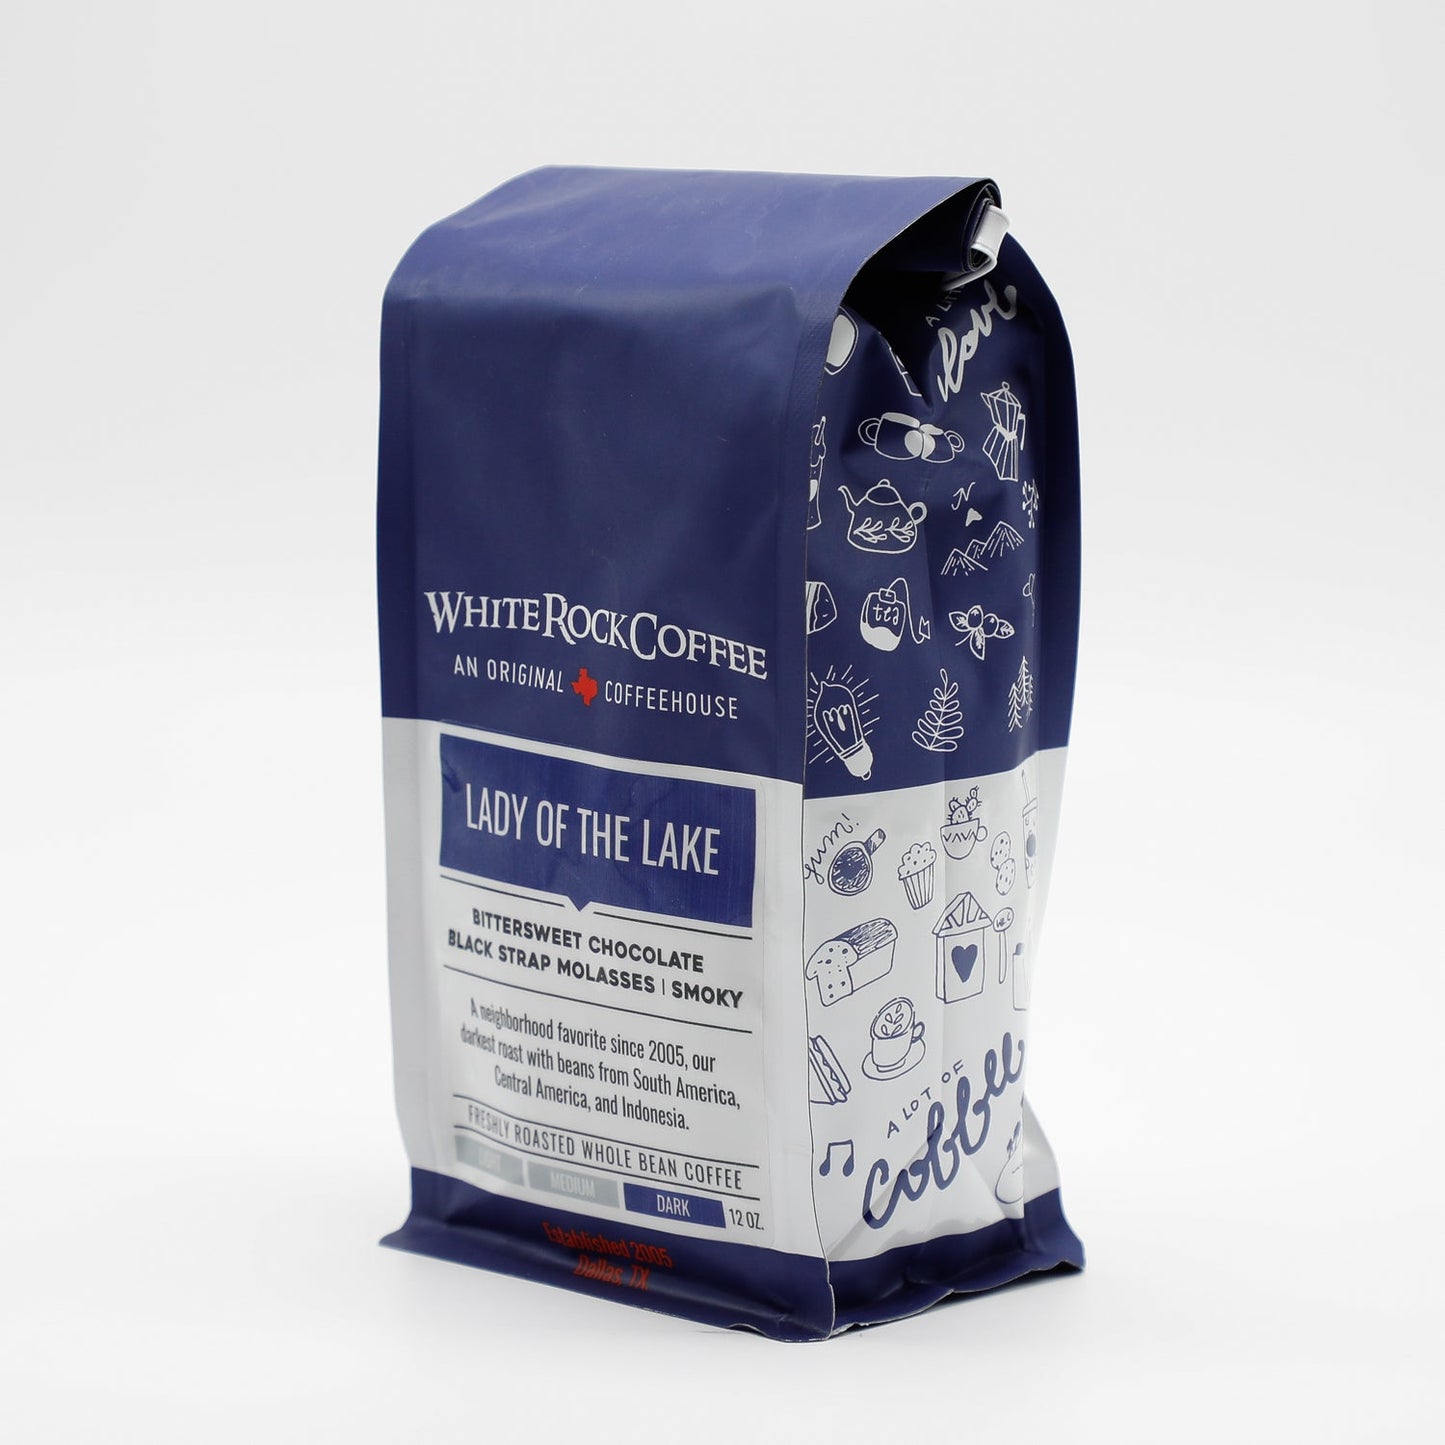 6 Month Coffee Gift Subscription - Lady of the Lake - White Rock Coffee